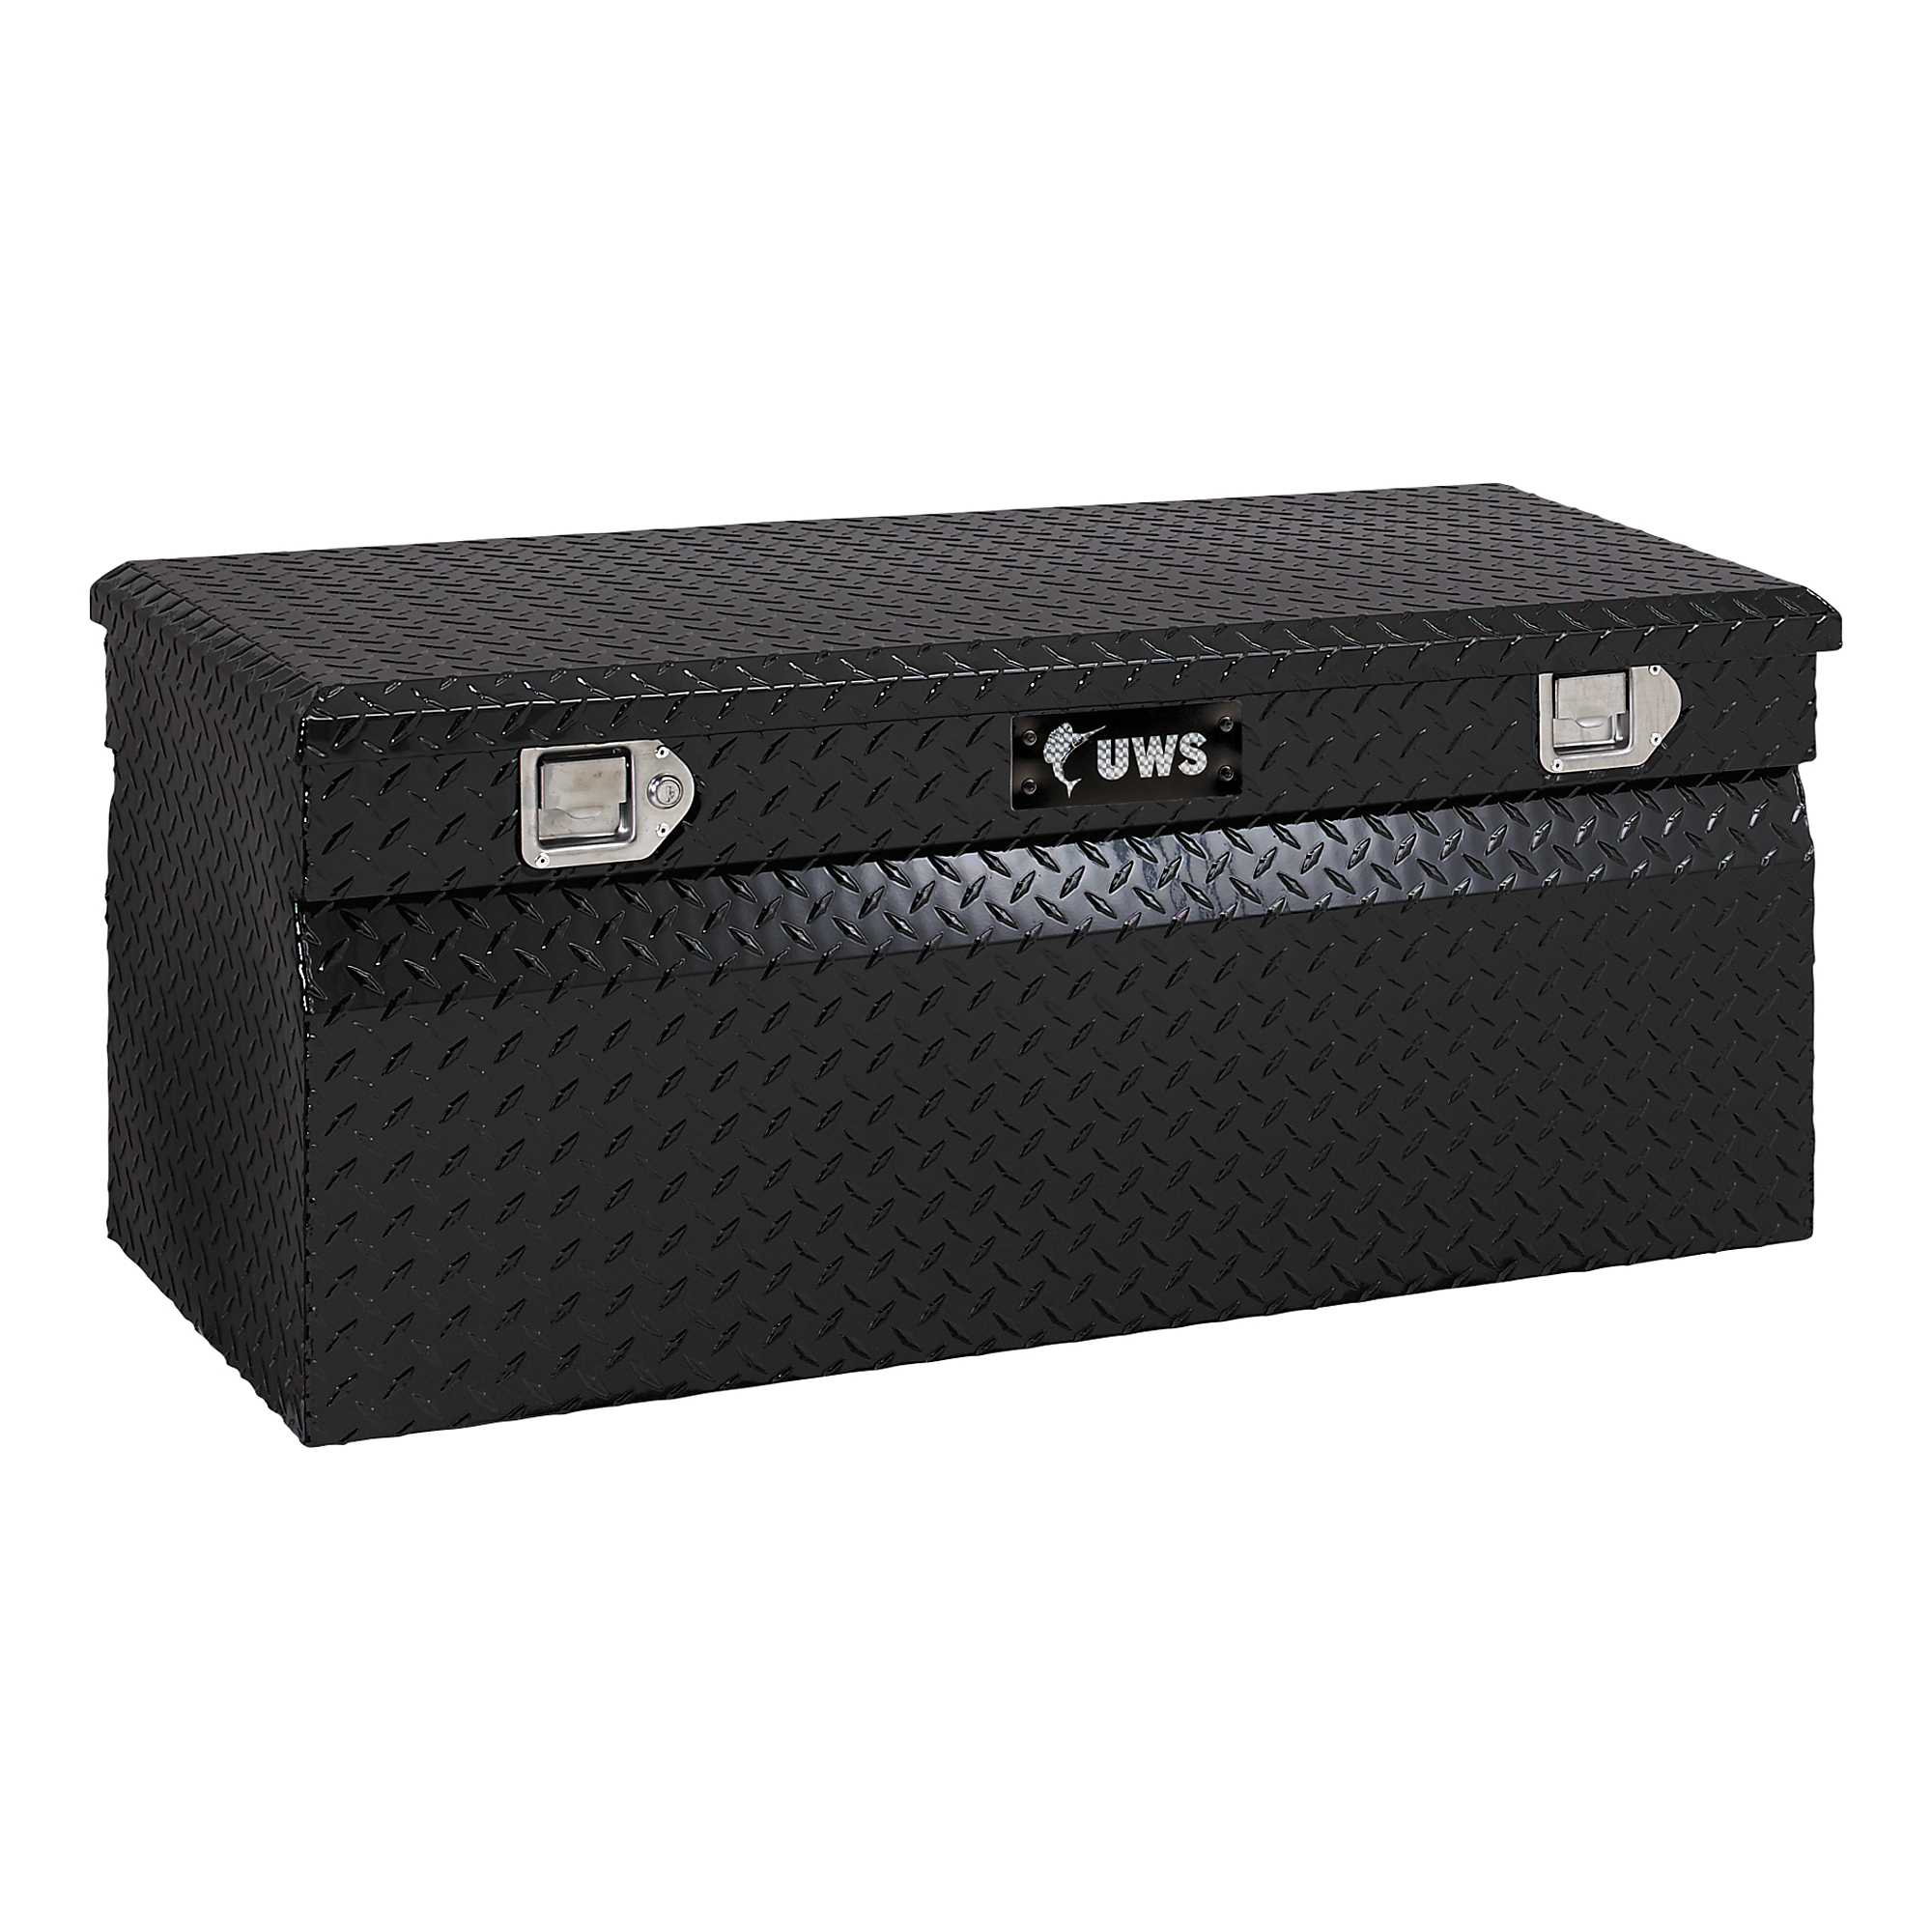 UWS, 42Inch Utility Chest Box, Width 42.875 in, Material Aluminum, Color Finish Gloss Black, Model EC20212